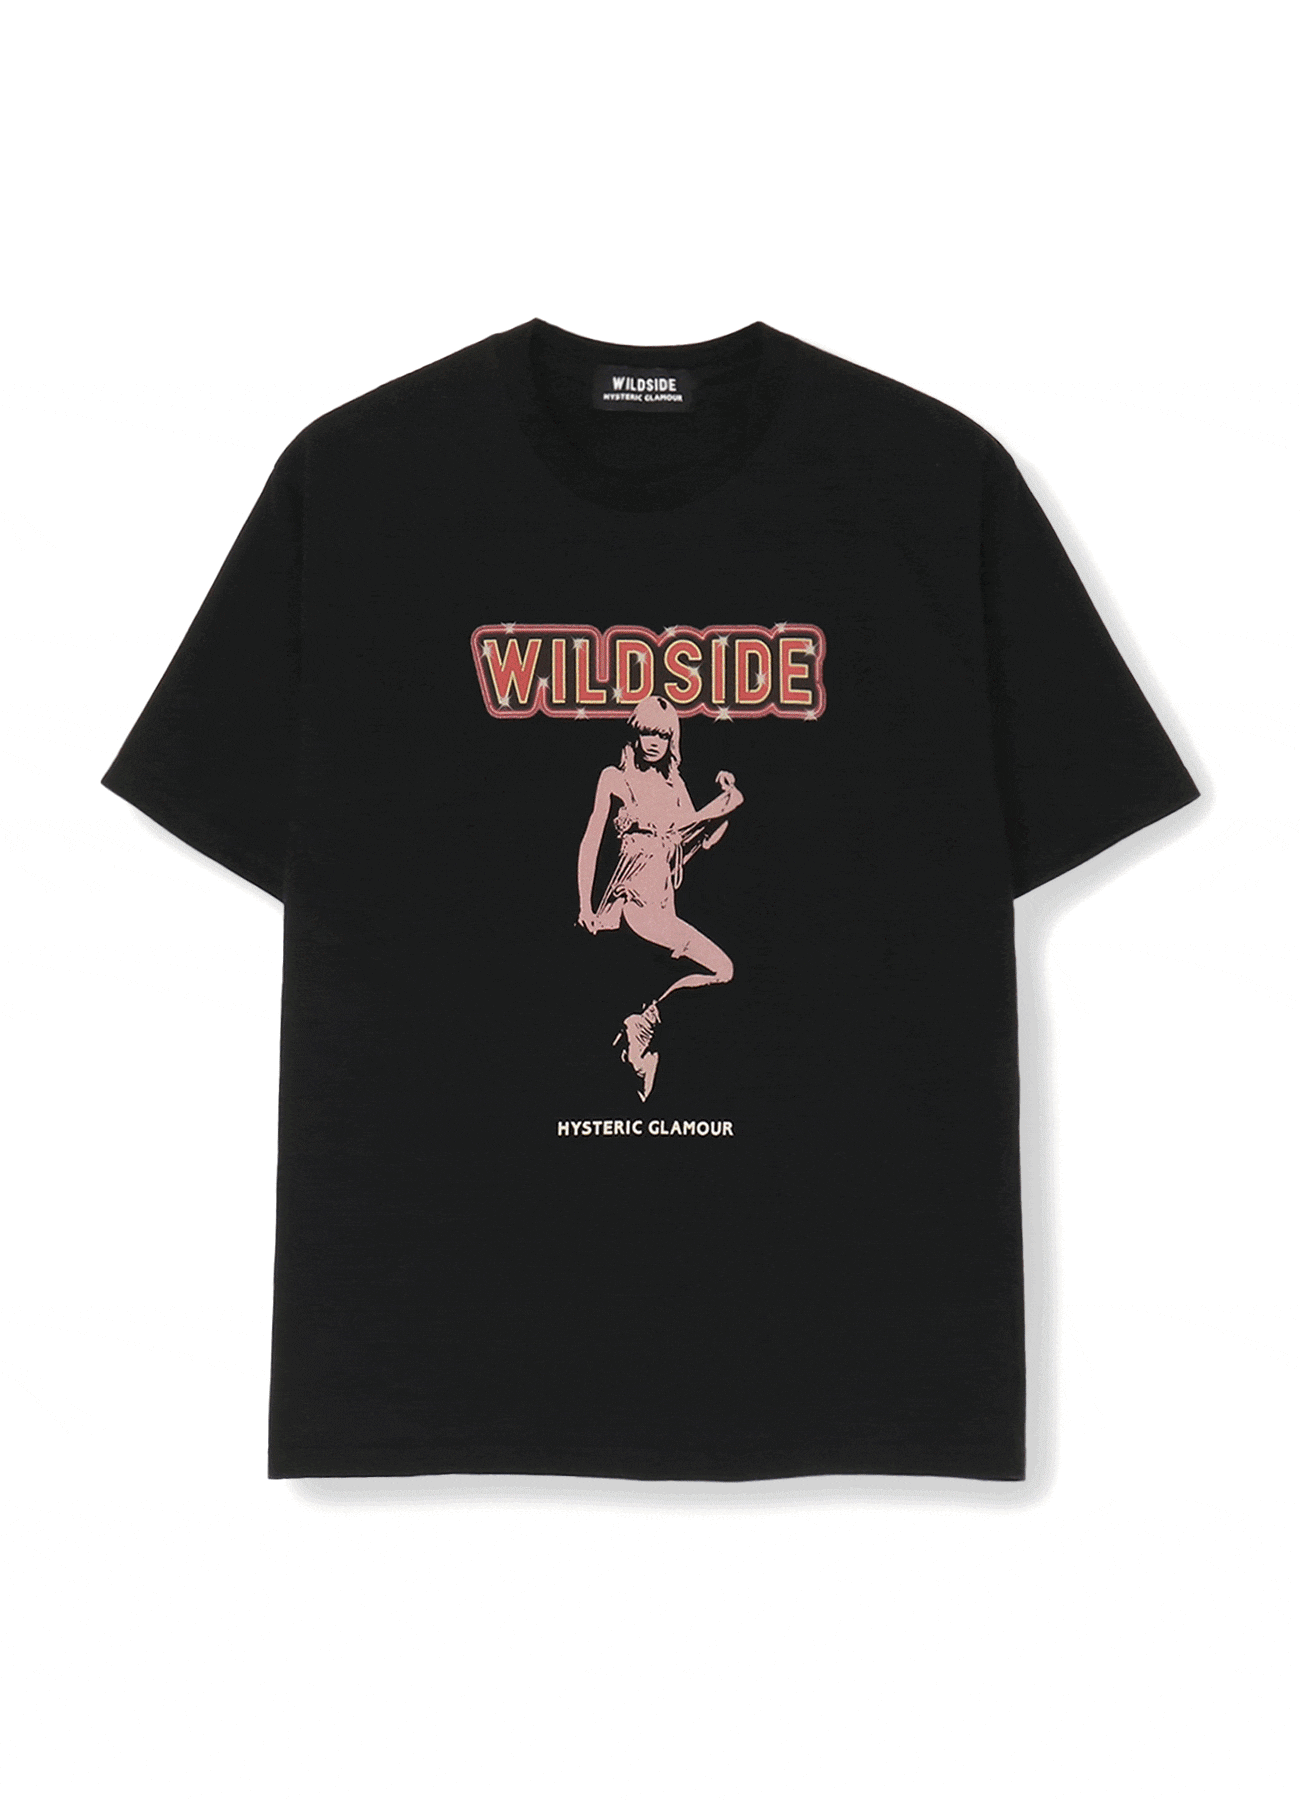 WILDSIDE × HYSTERIC GLAMOUR ”GOODNIGHT LADIES” T-shirt